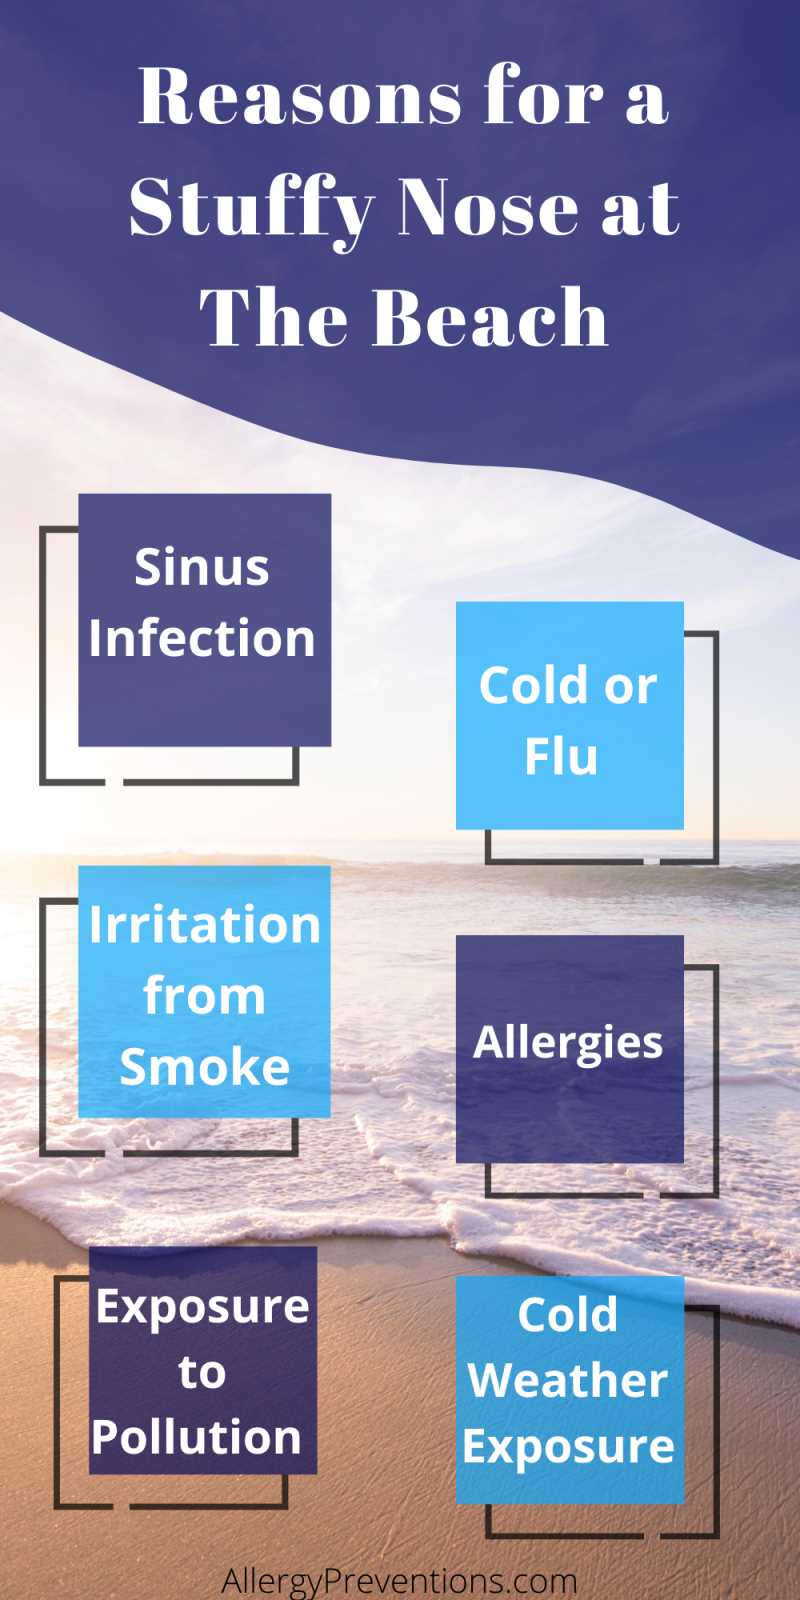 Reasons for a stuffy nose at the beach infographic. Sinus infection, cold or flu, irritation from smoke, allergies, cold weather exposure, exposure to pollution